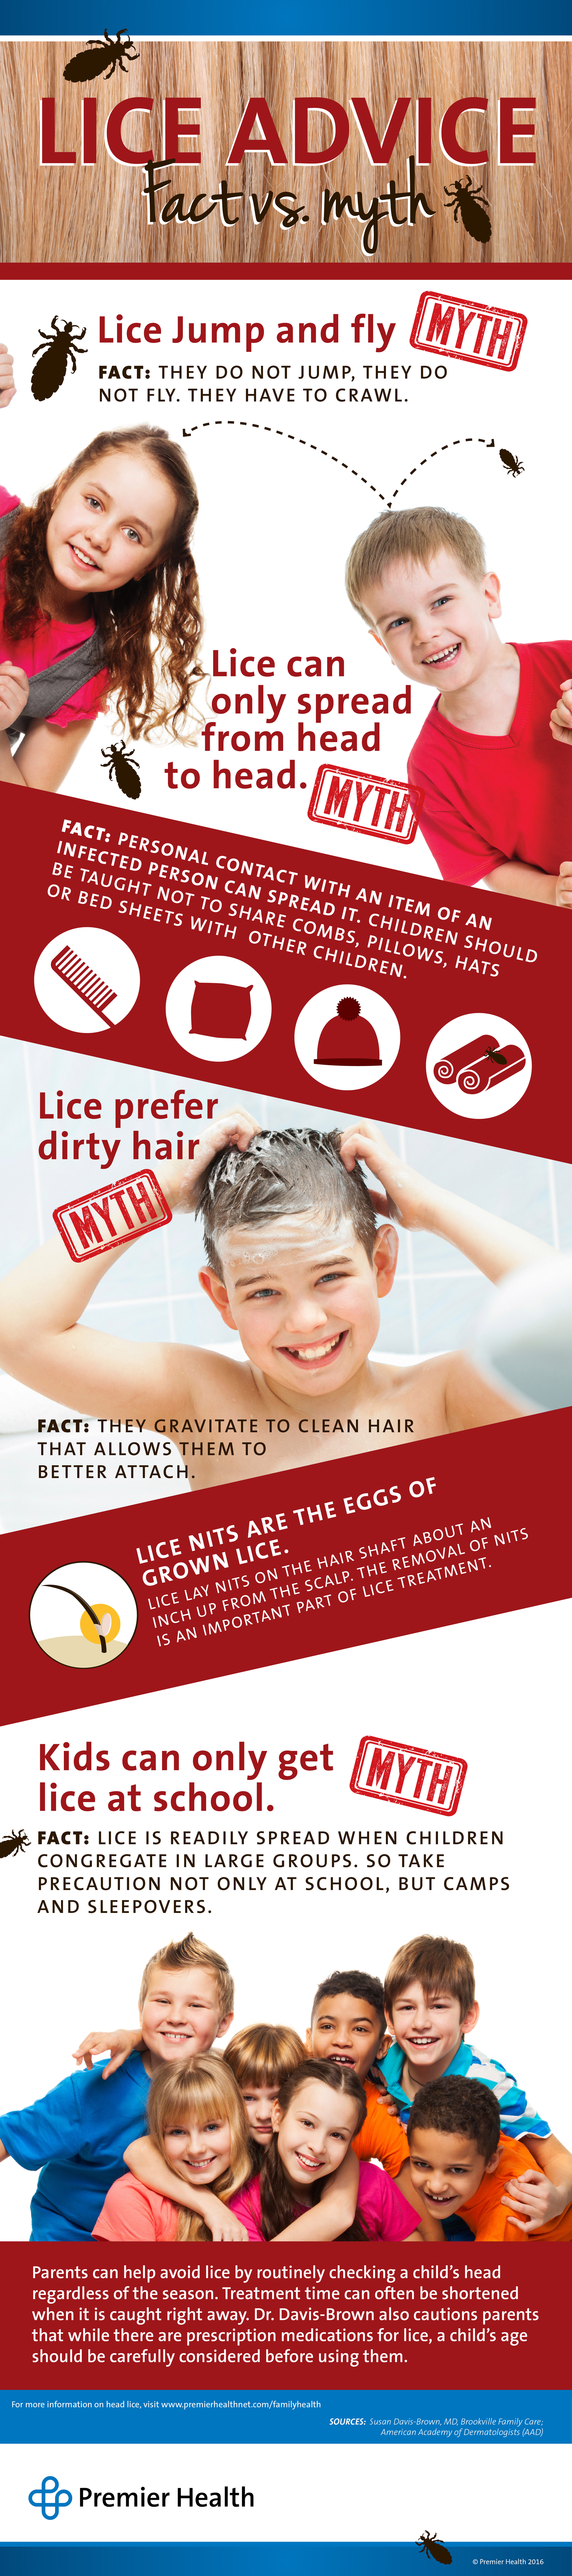 Lice Advice infographic in content image